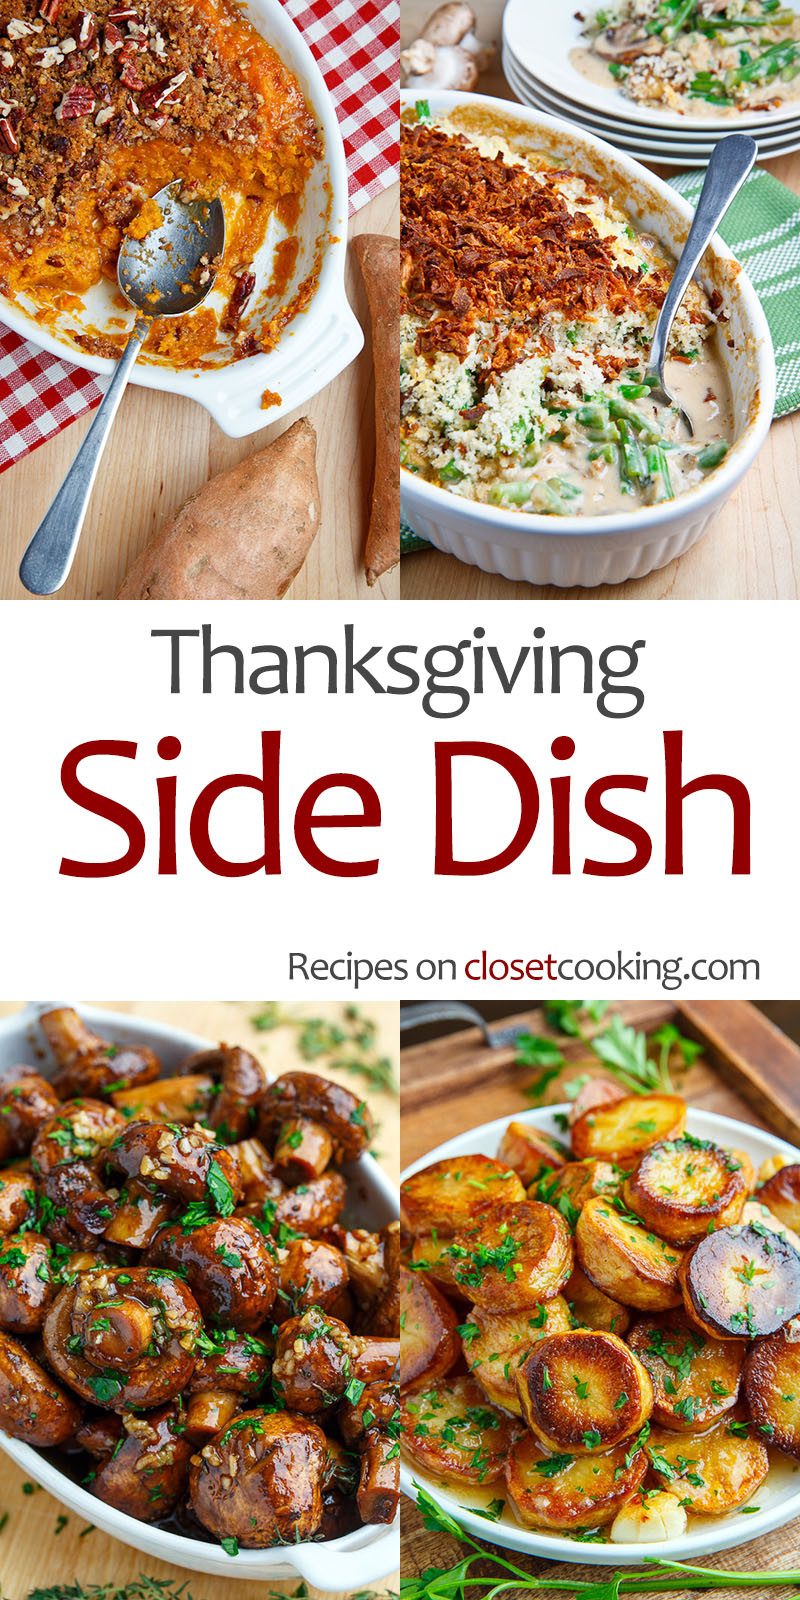 Thanksgiving Side Dishes Recipes
 Thanksgiving Side Dish Recipes Closet Cooking